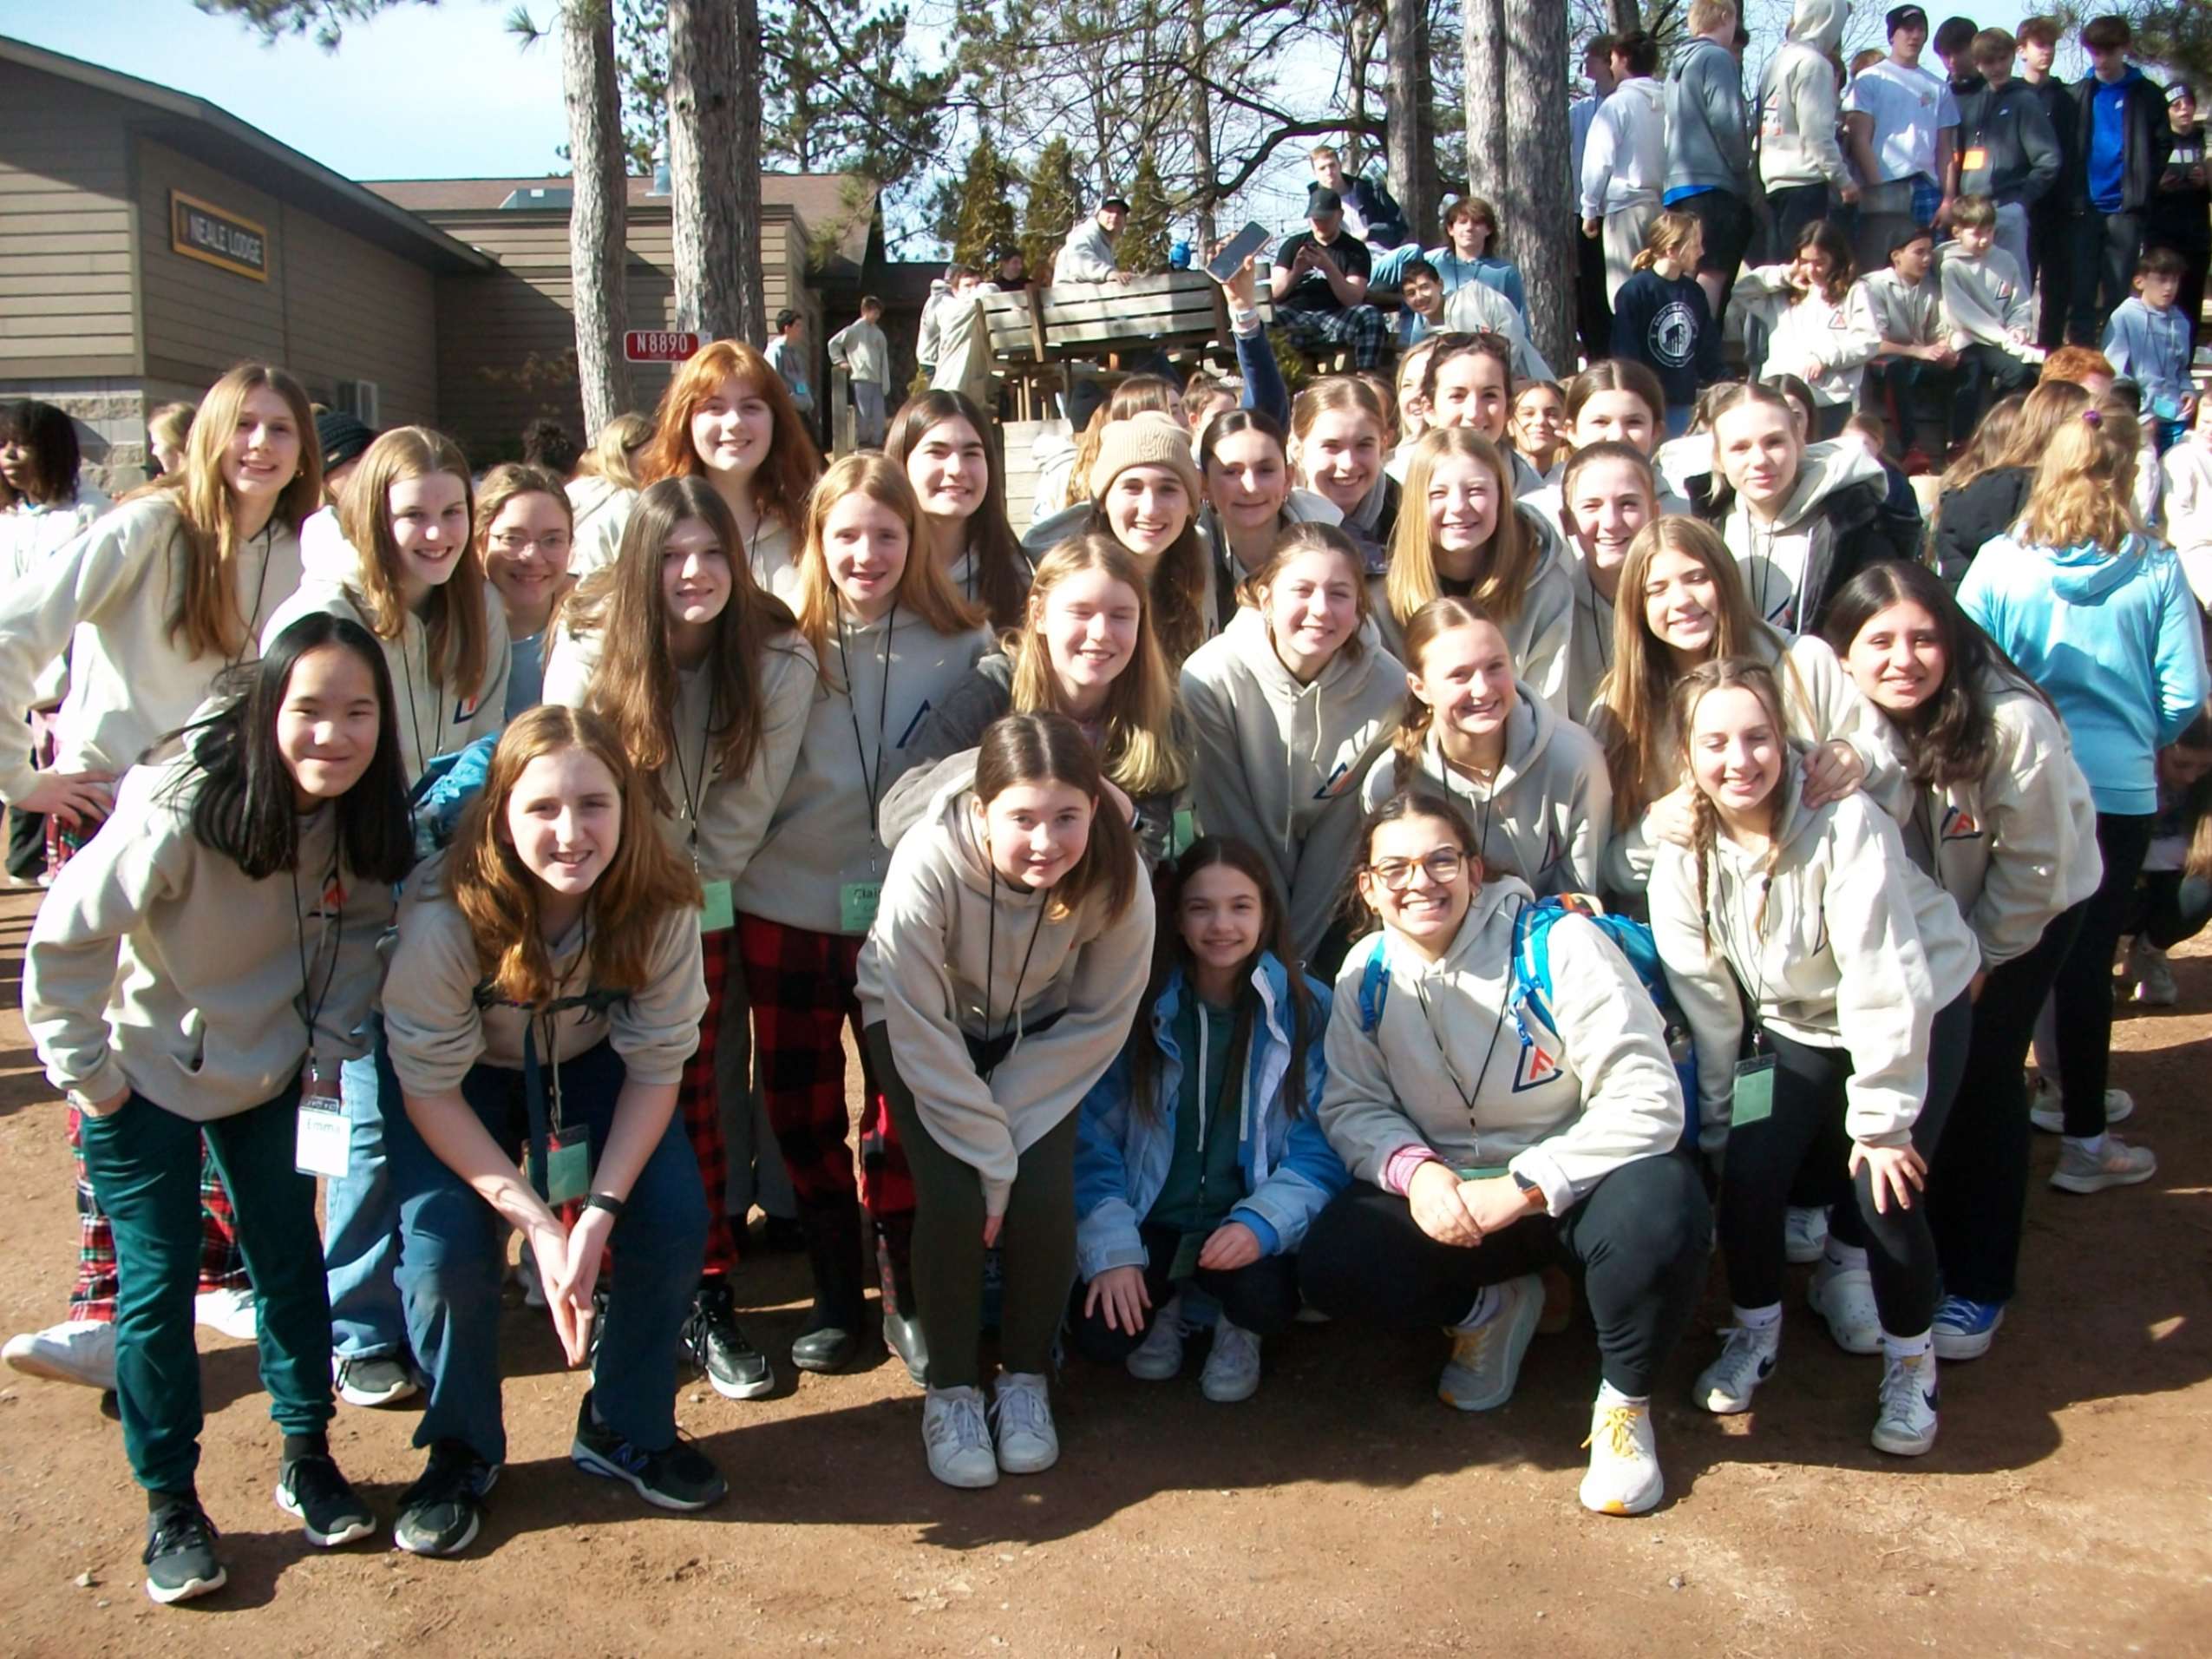 A group of students poses for a photo at a student youth group retreat.